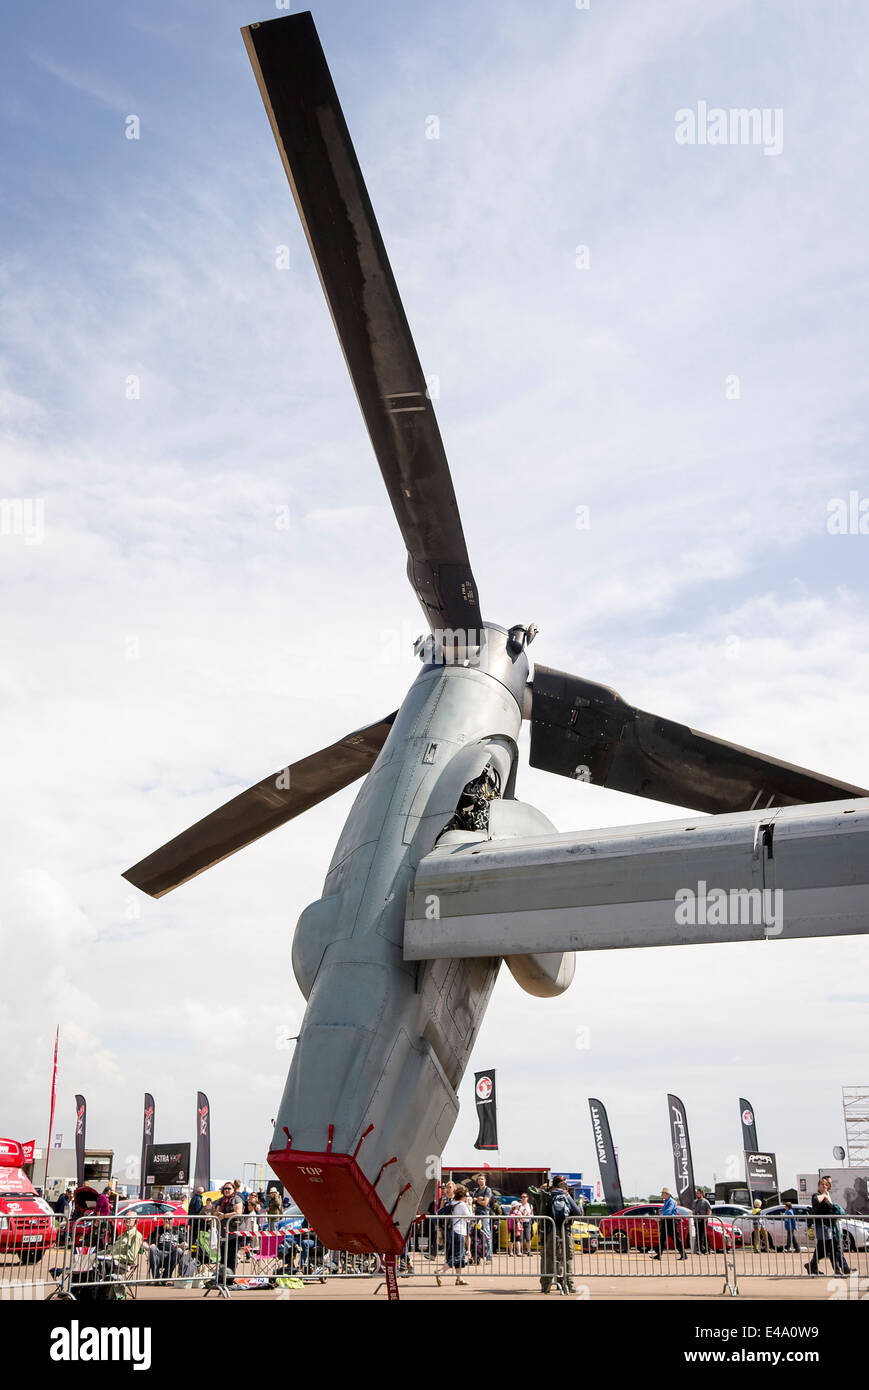 Wing-tip rotor on Osprey Tiltrotor aircraft Stock Photo